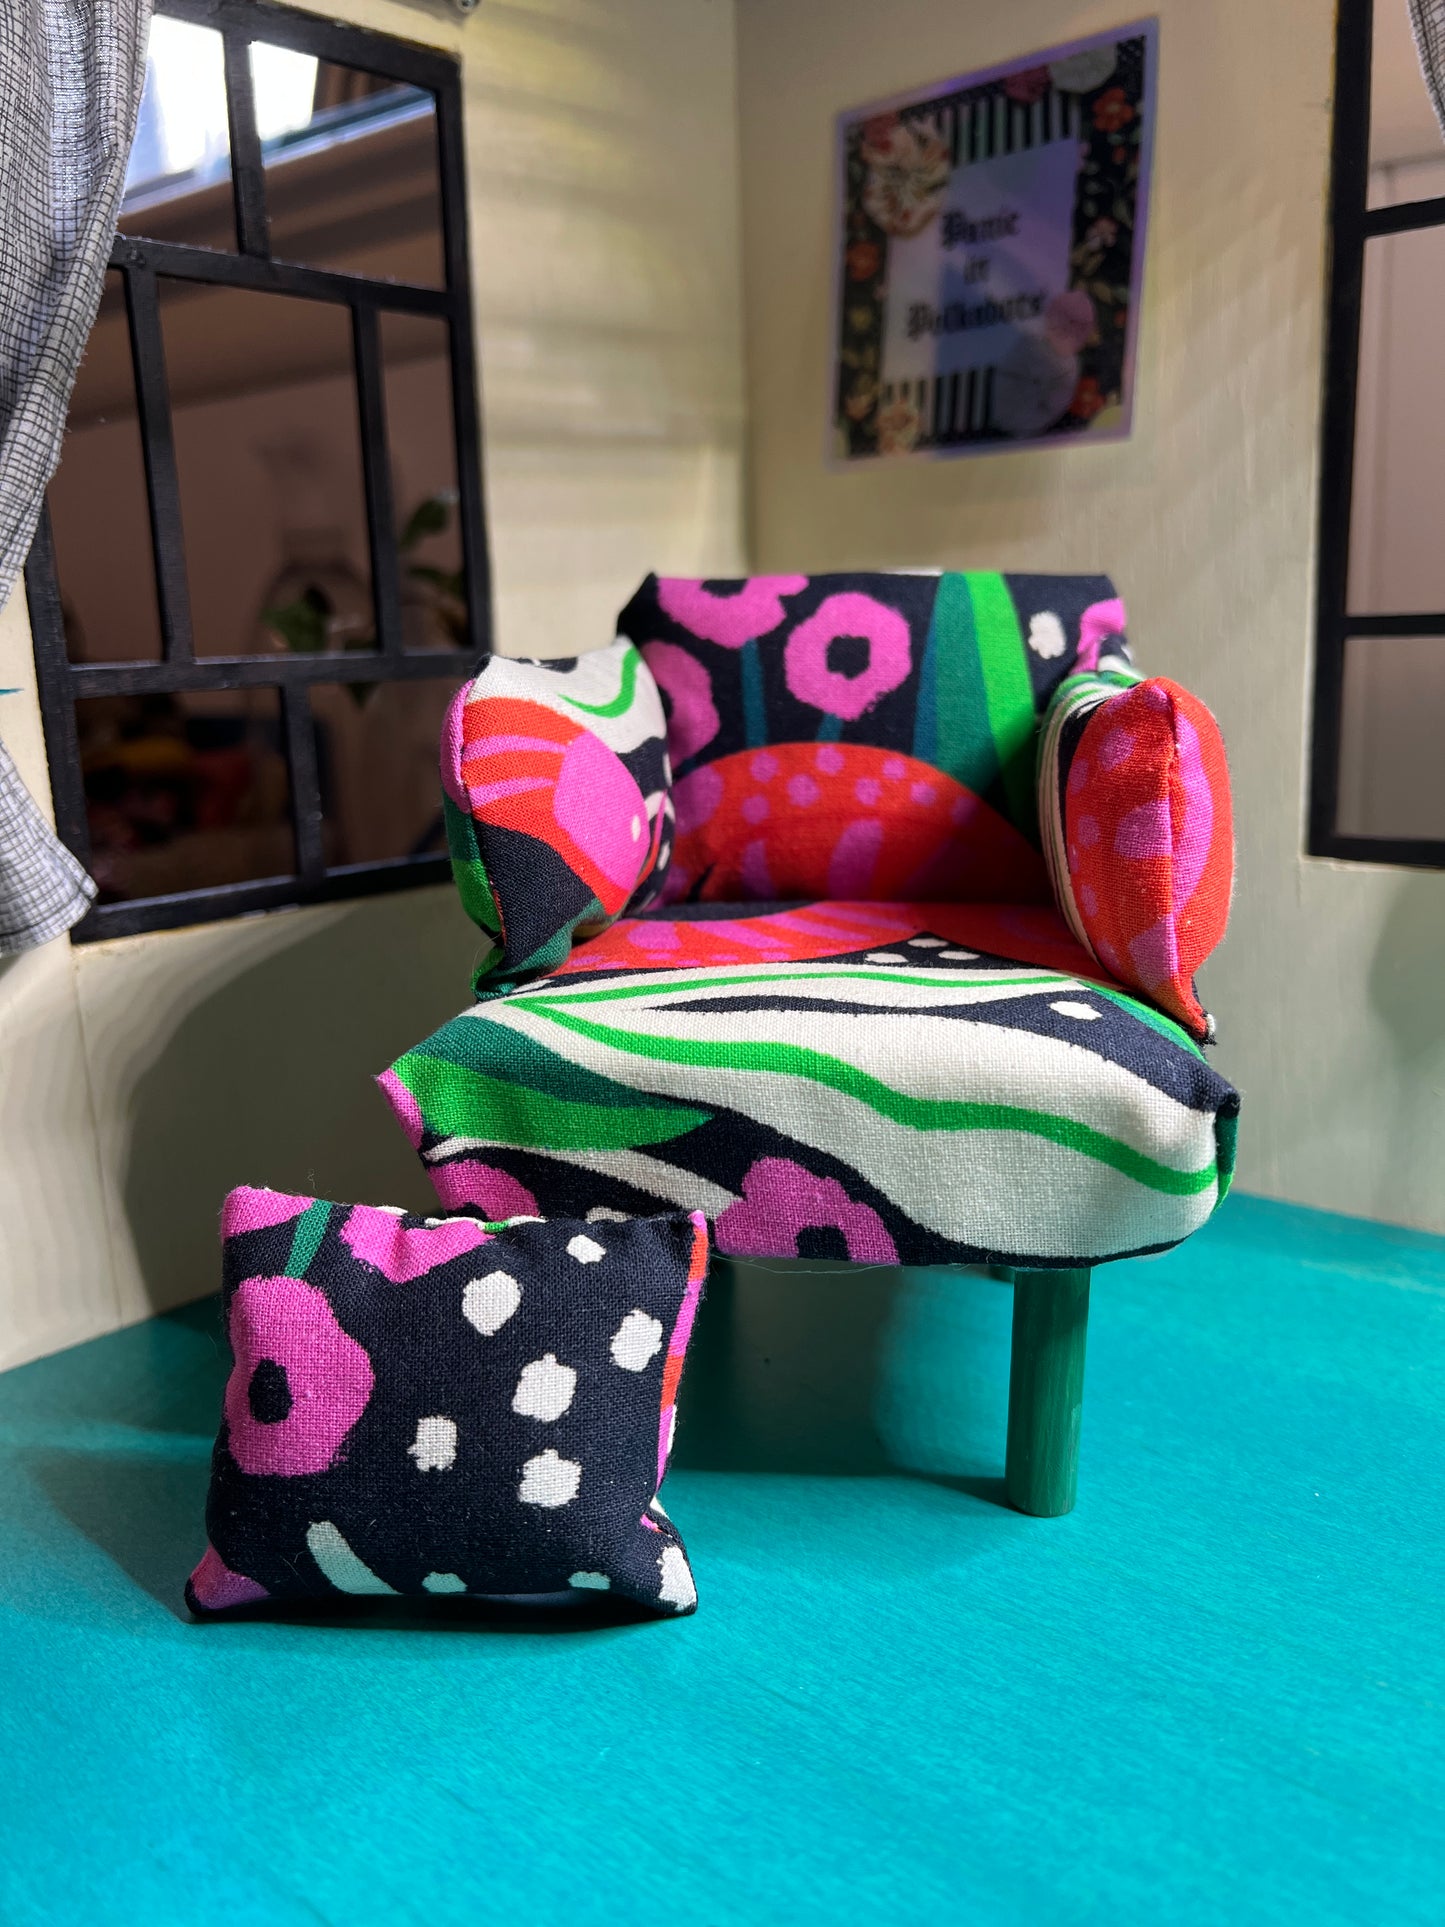 Barbie Chair snakes and leaves bright pink and green design, with pillow set down to the side of chair